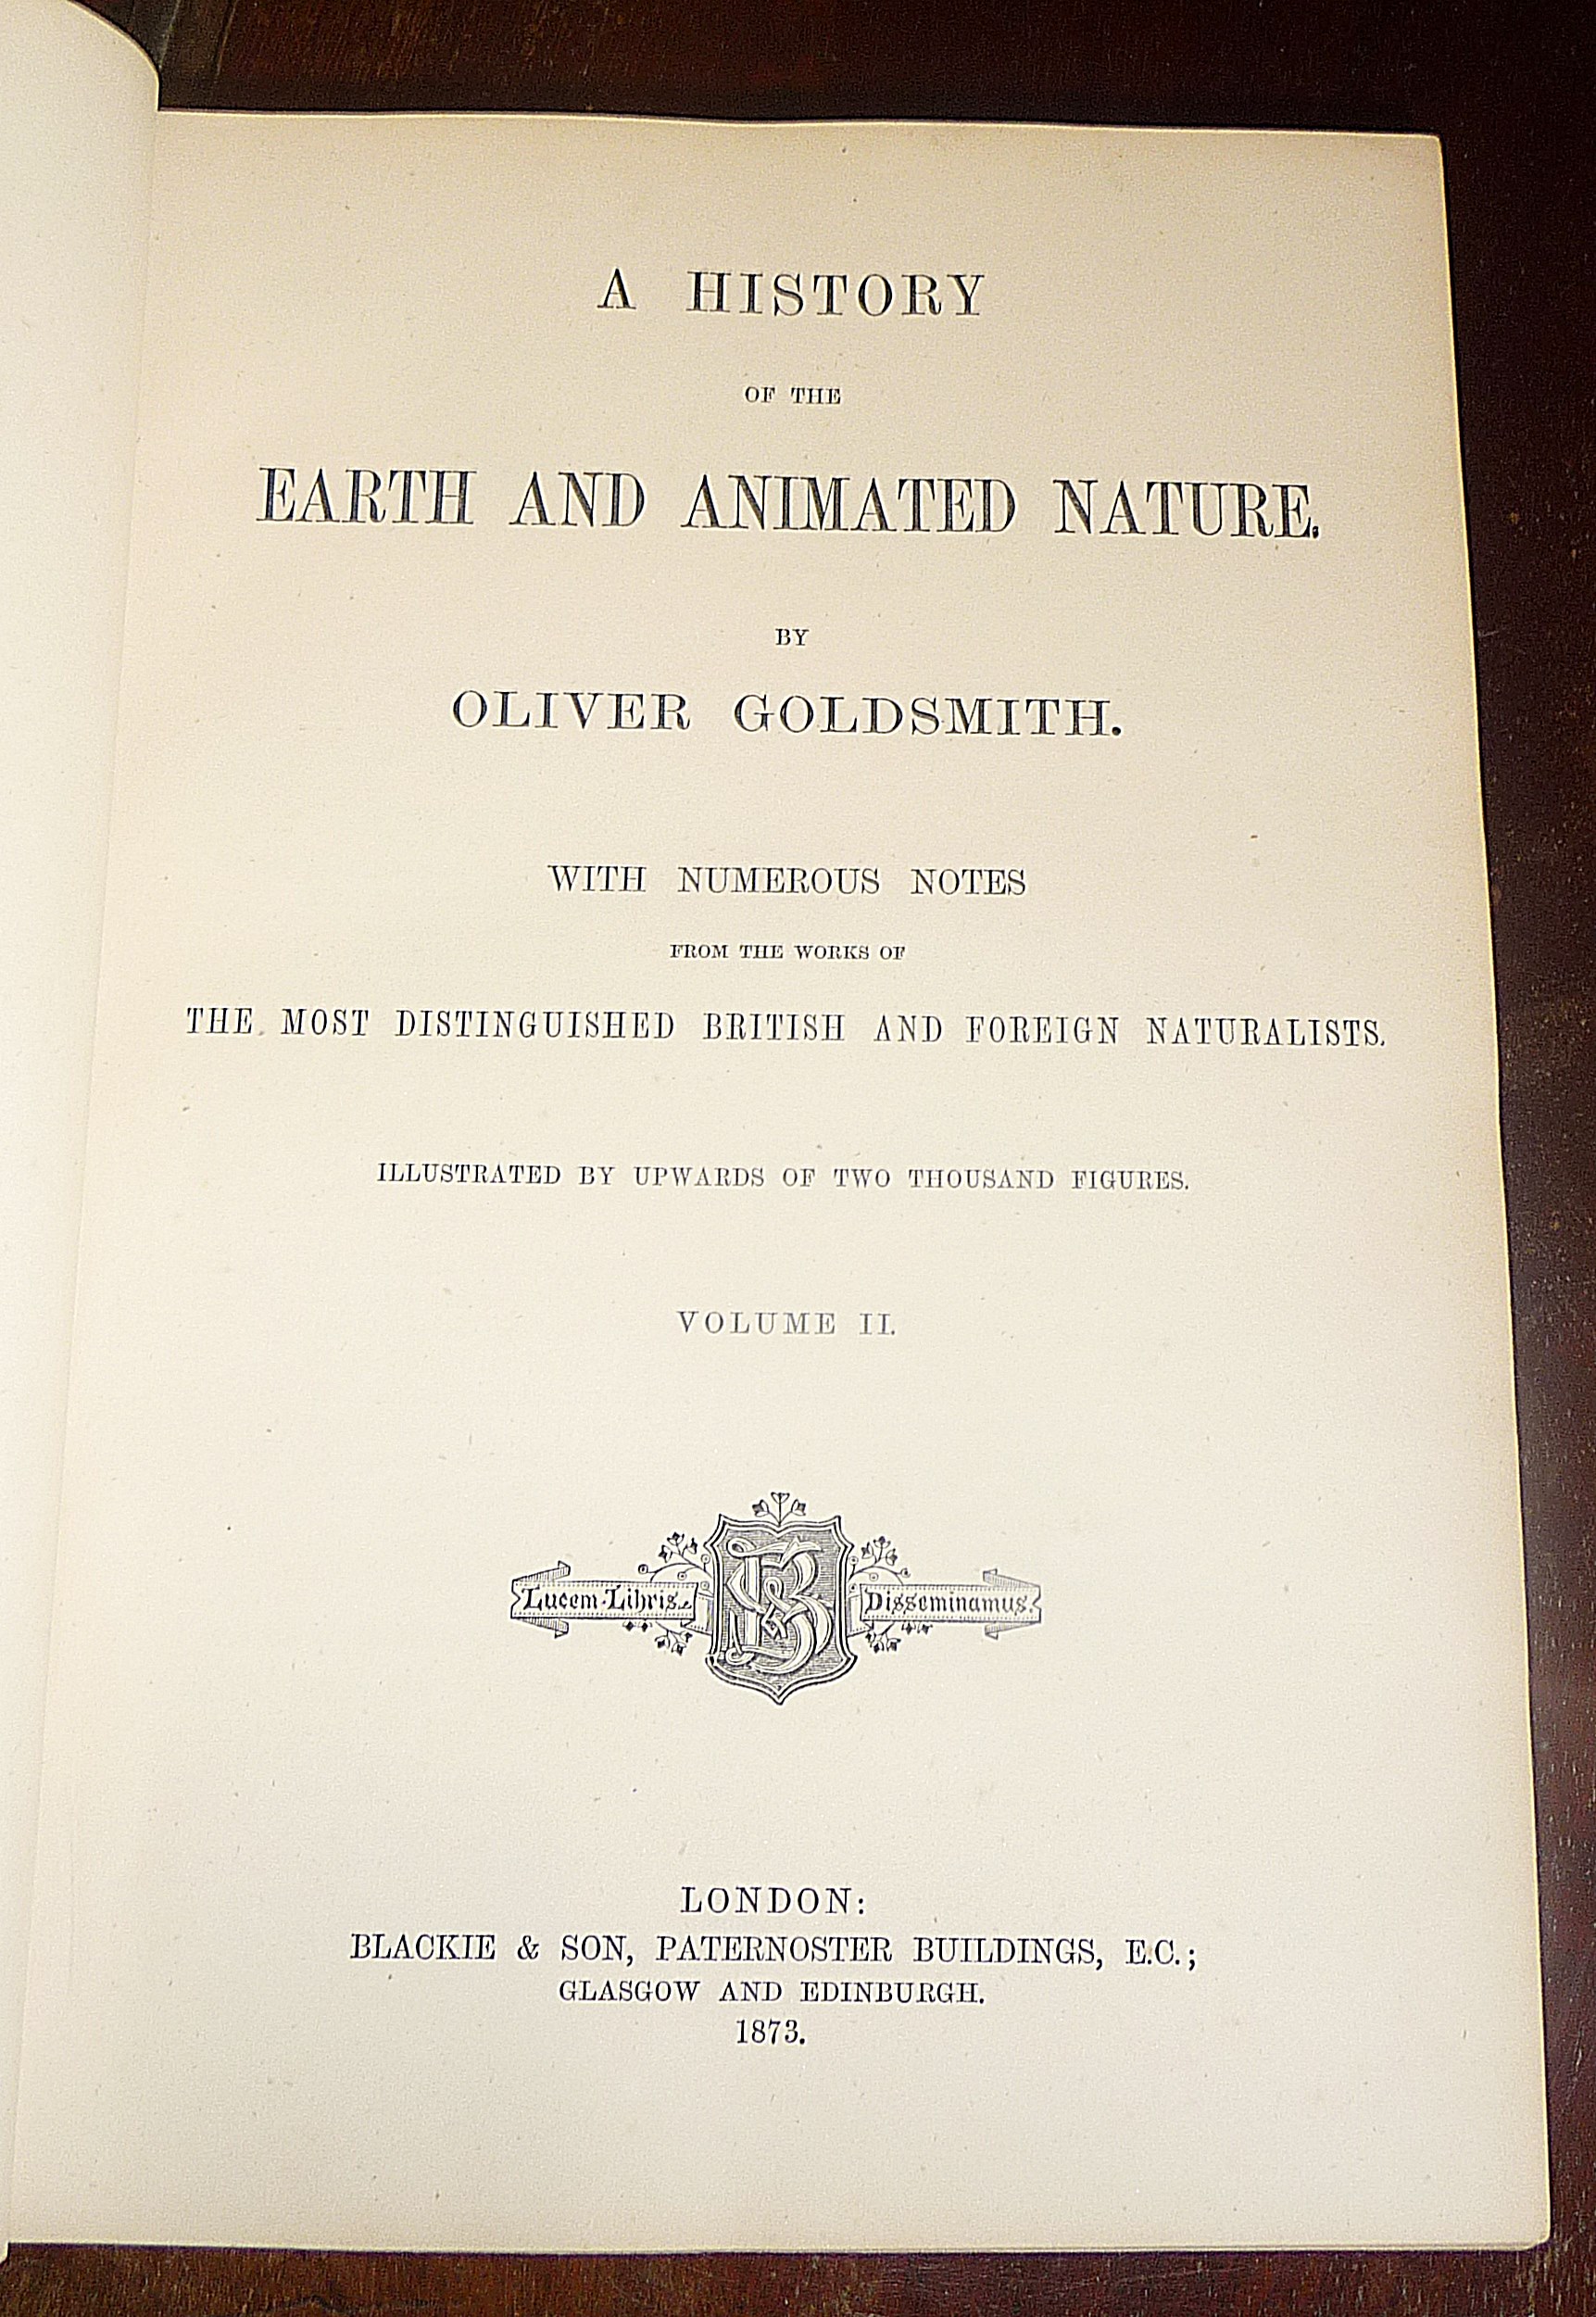 A History of Earth and Animated Nature by Oliver Goldsmith 1873, 2 vols half leather, illustrated - Image 3 of 3